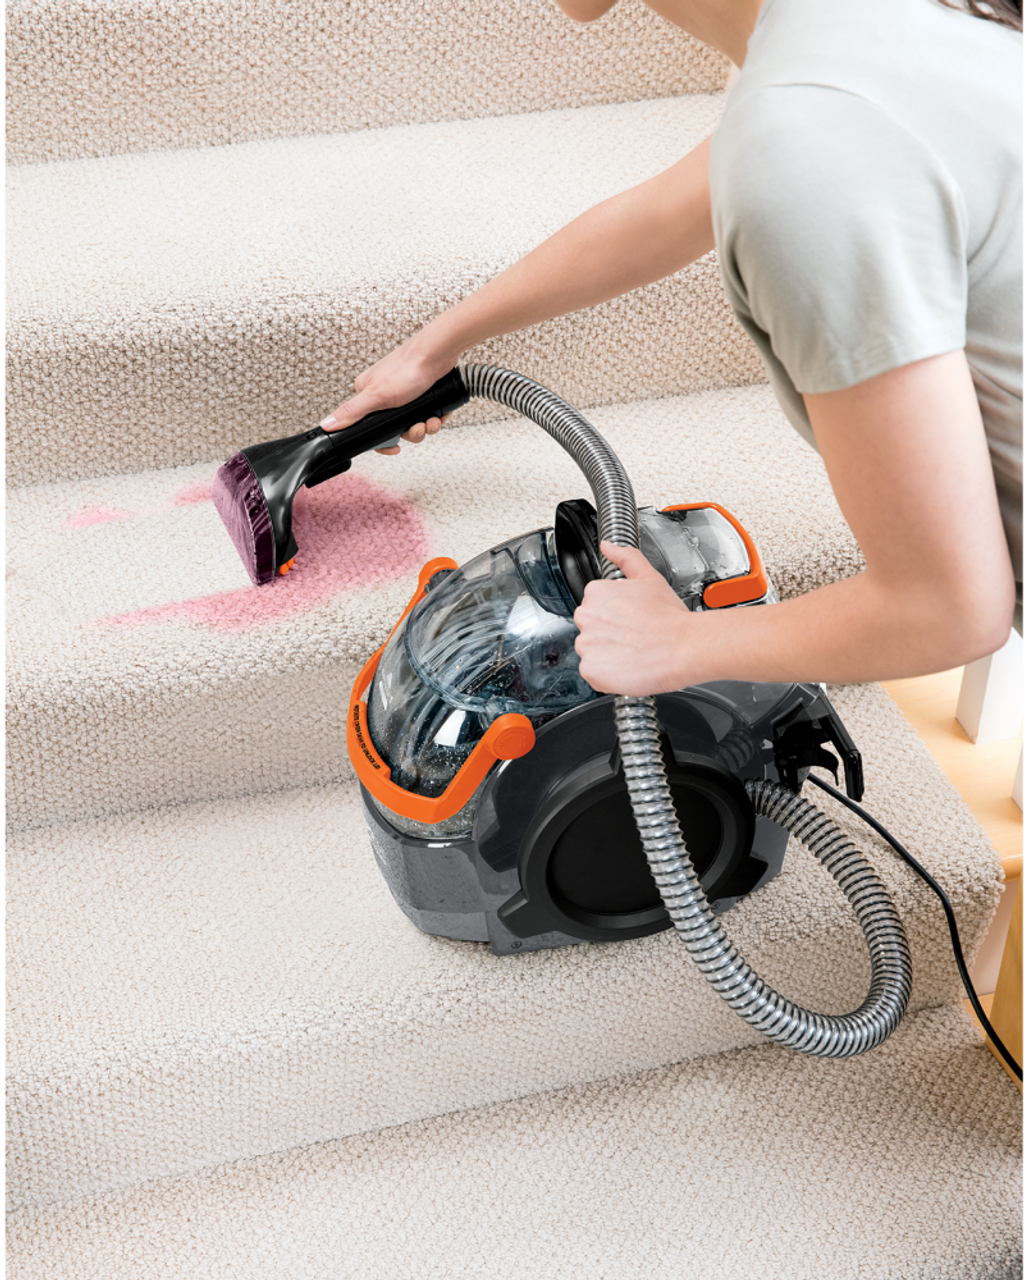 Bissell SPOTCLEAN™ TURBO + ANTIBAC 33862 - Buy Online with